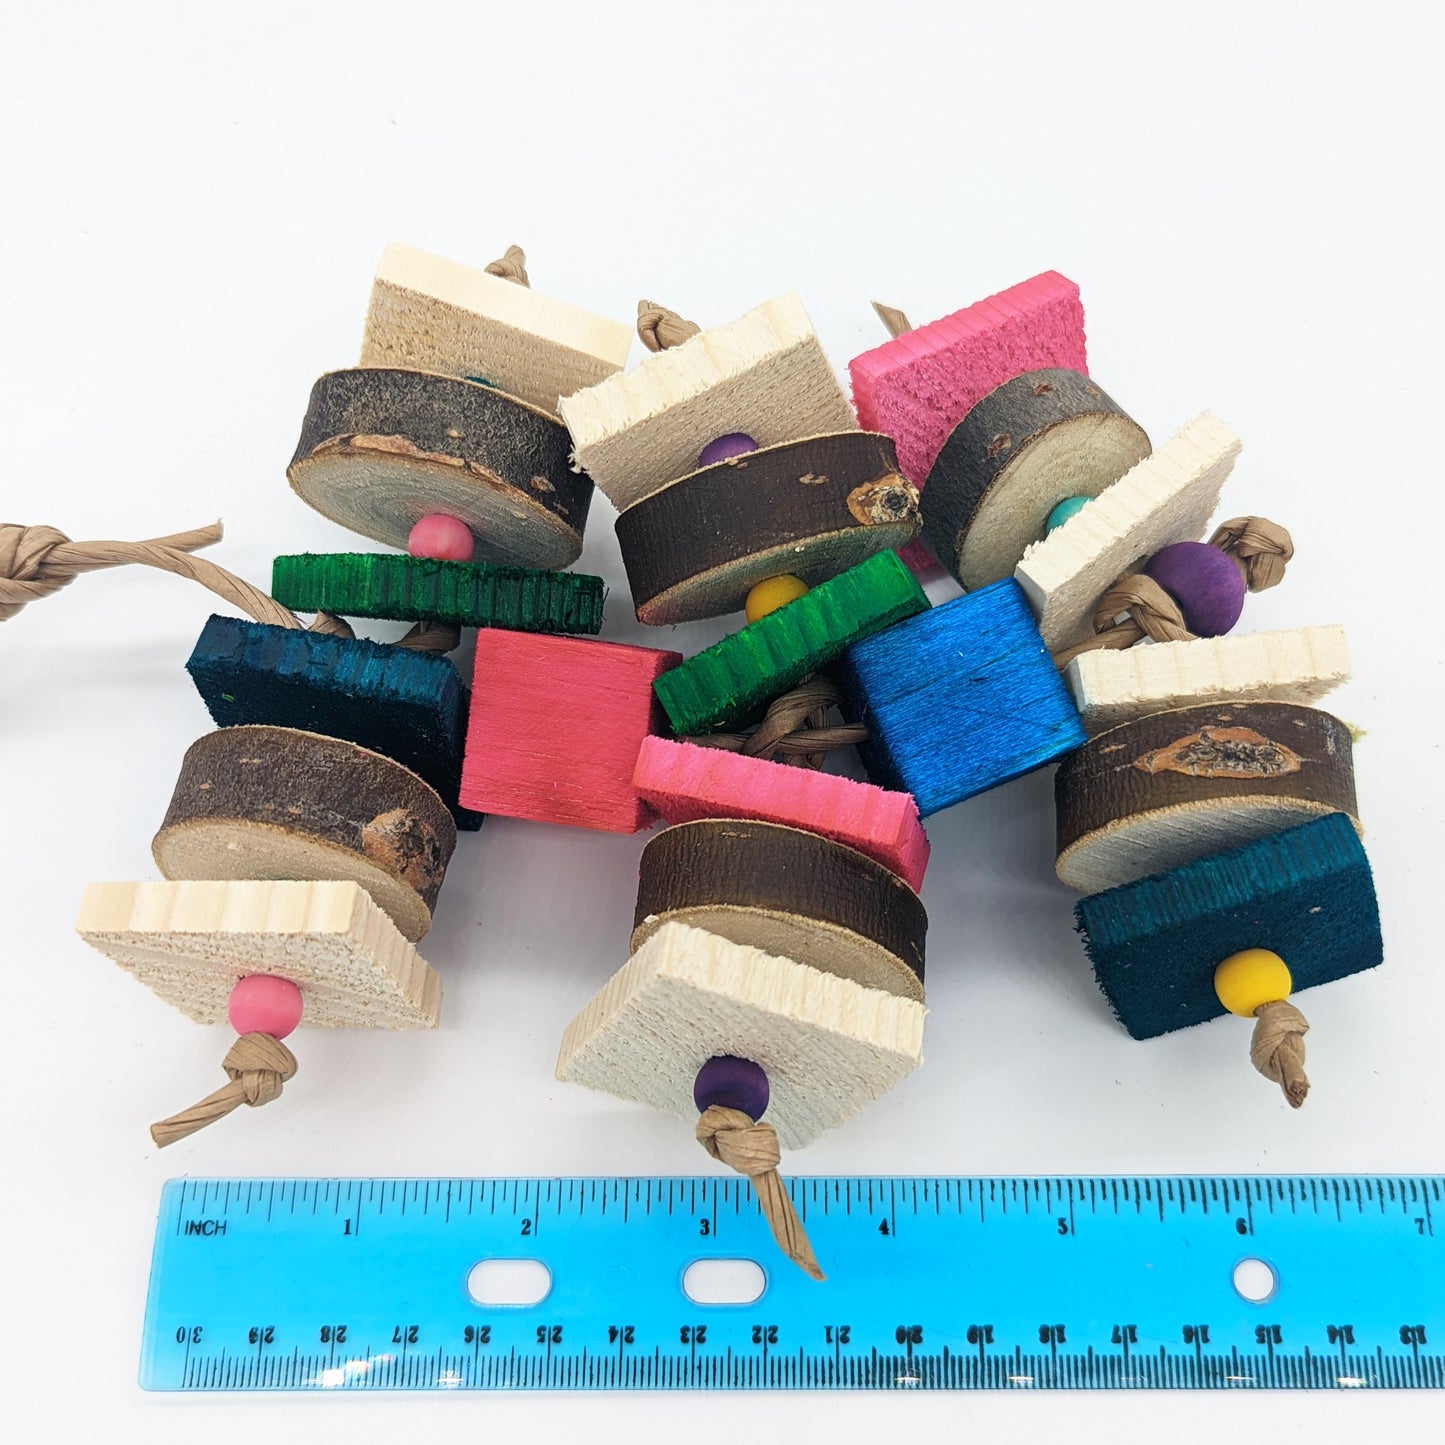 A bird toy for birds that love wood! Alternating pieces of 1/4" thin pine cut against the grain with pieces of natural willow or cottonwood slices. Wooden beads between the slices of wood, and balsa blocks between the levels of the toy.  Shown with a ruler to show its length of about 7". 